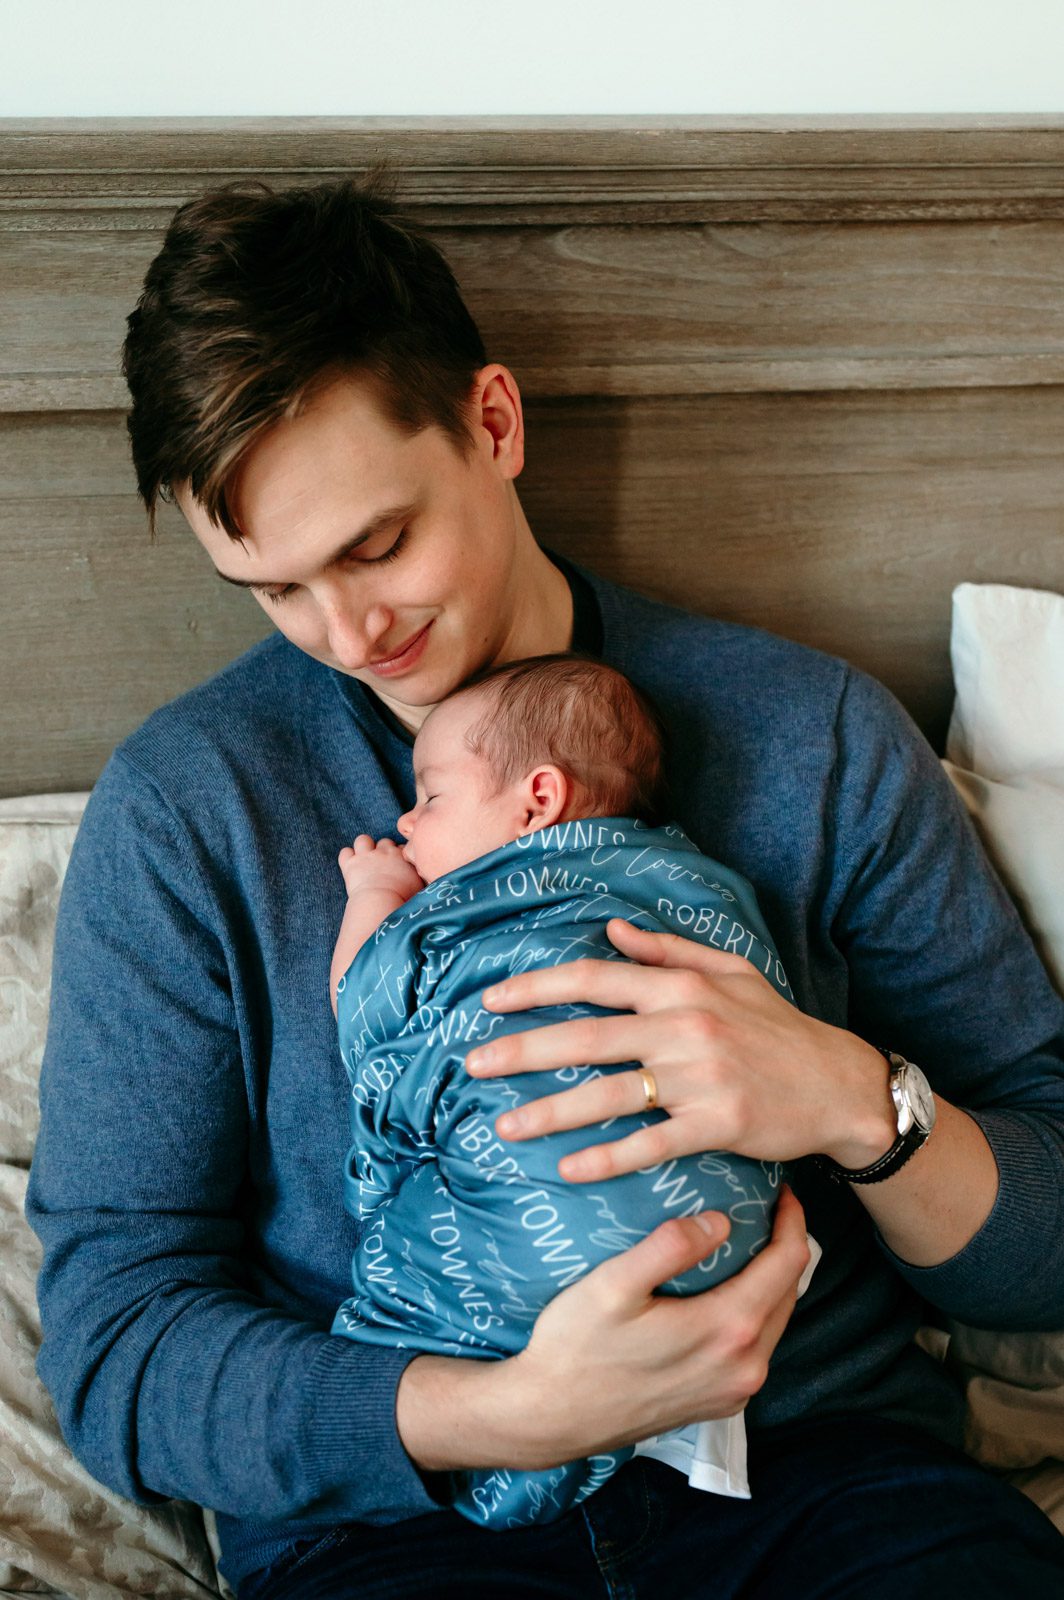 Father sitting on his bed and snuggling his newborn son against his chest during a natural newborn photo session